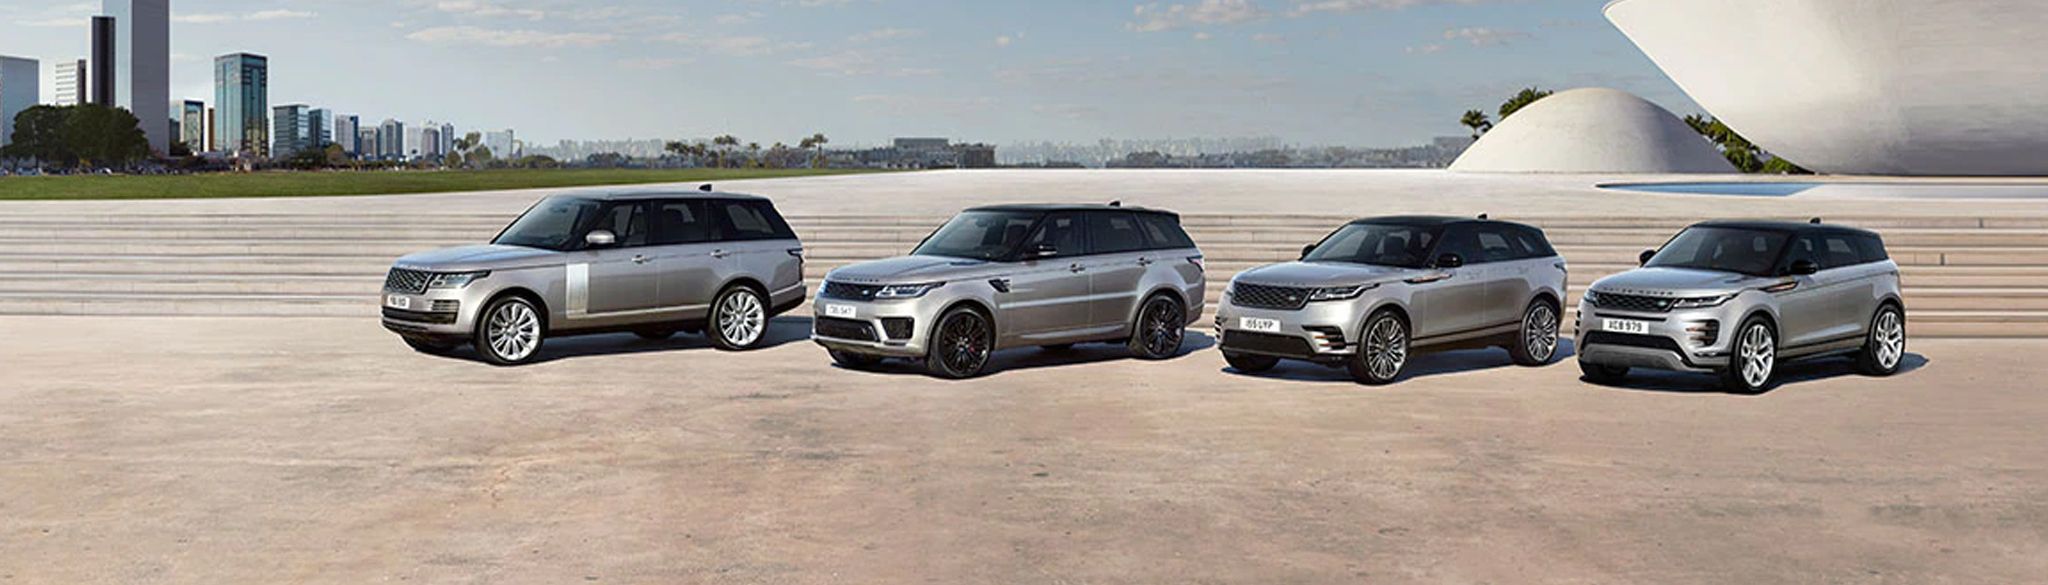 Silver Range Rover line up